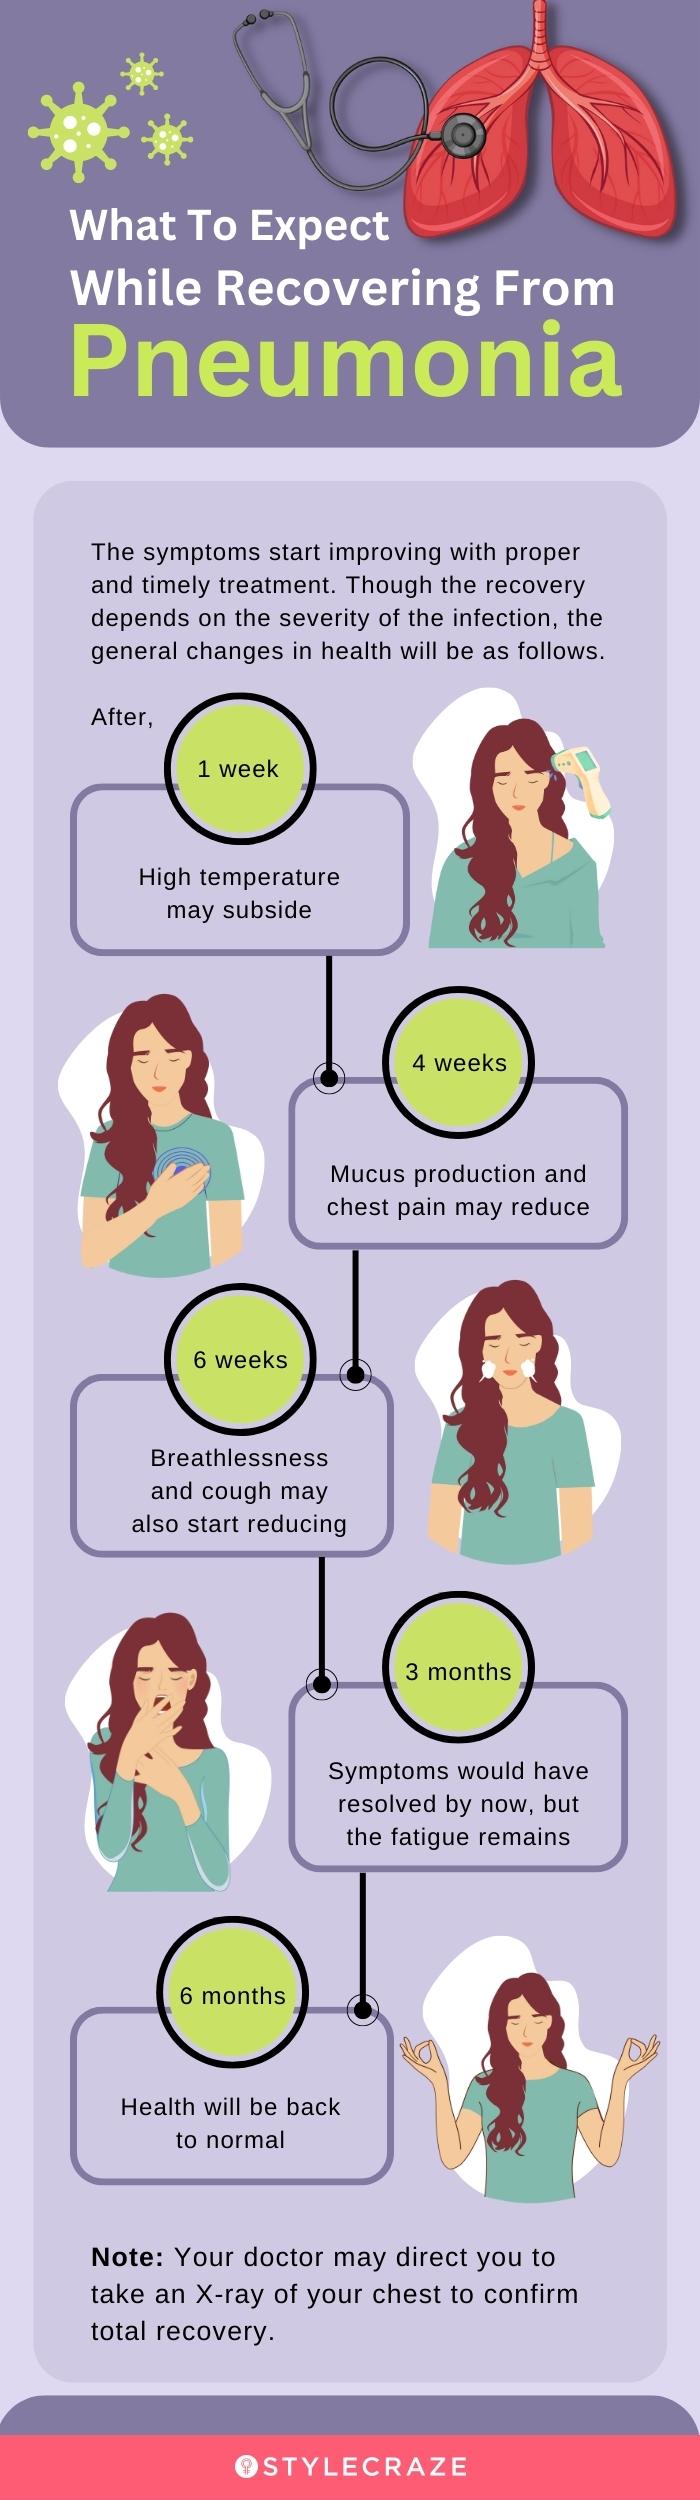 what to expect while recovering from pneumonia [infographic]